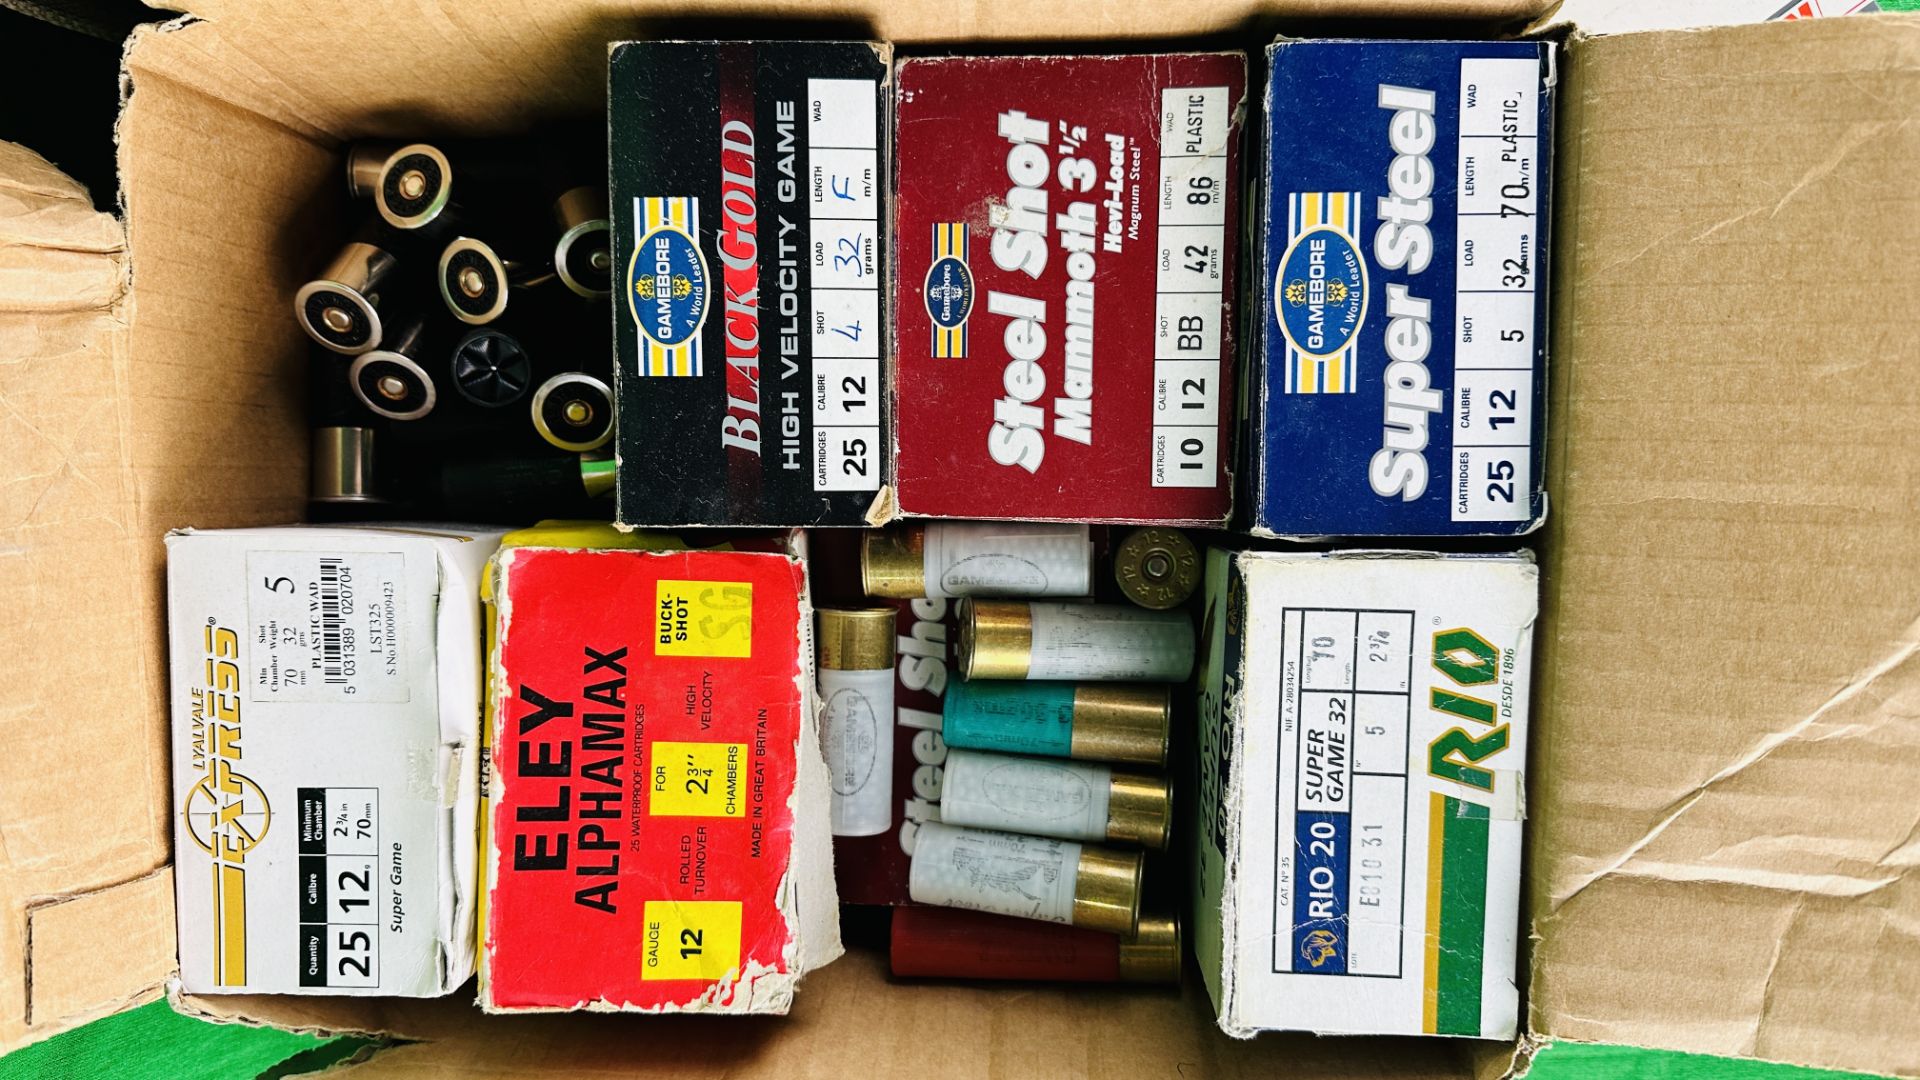 APPROX 214 MIXED 12 GAUGE CARTRIDGES + FERRET ALARM - (TO BE COLLECTED IN PERSON BY LICENCE HOLDER - Image 2 of 5